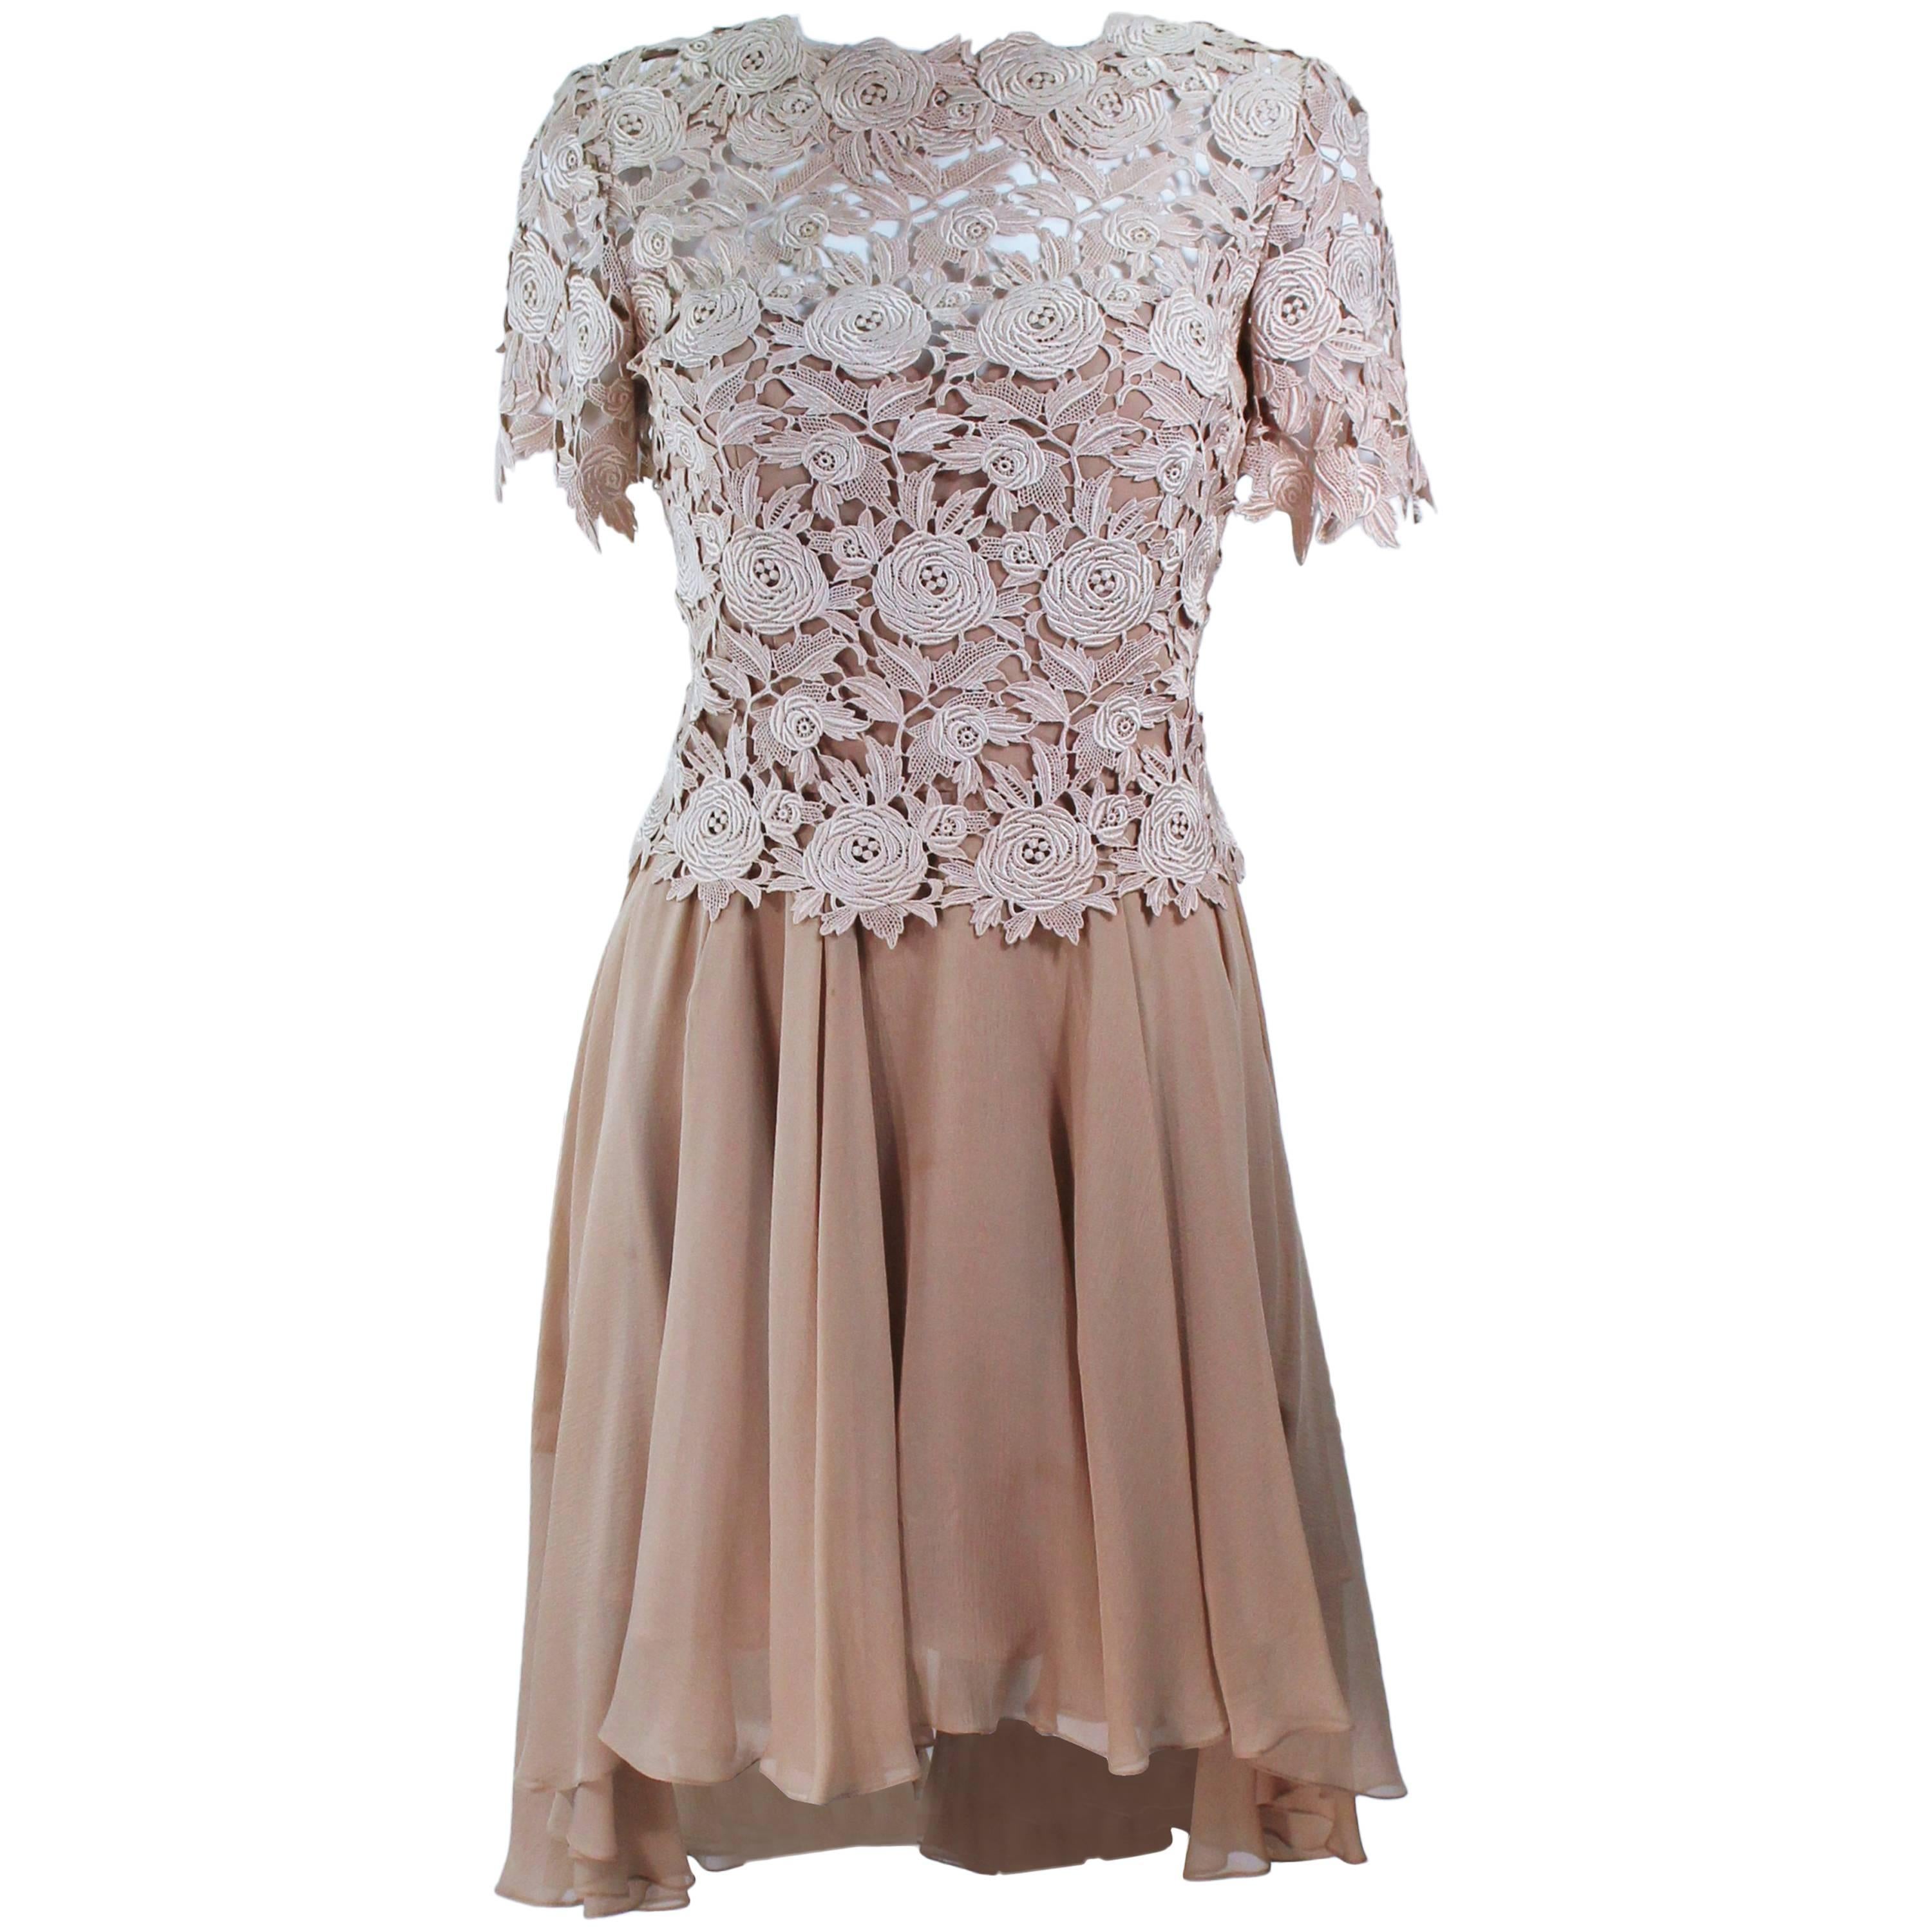 TRAVILLA Floral Lace Cocktail Dress with Chiffon Skirt Size 4 6 For Sale